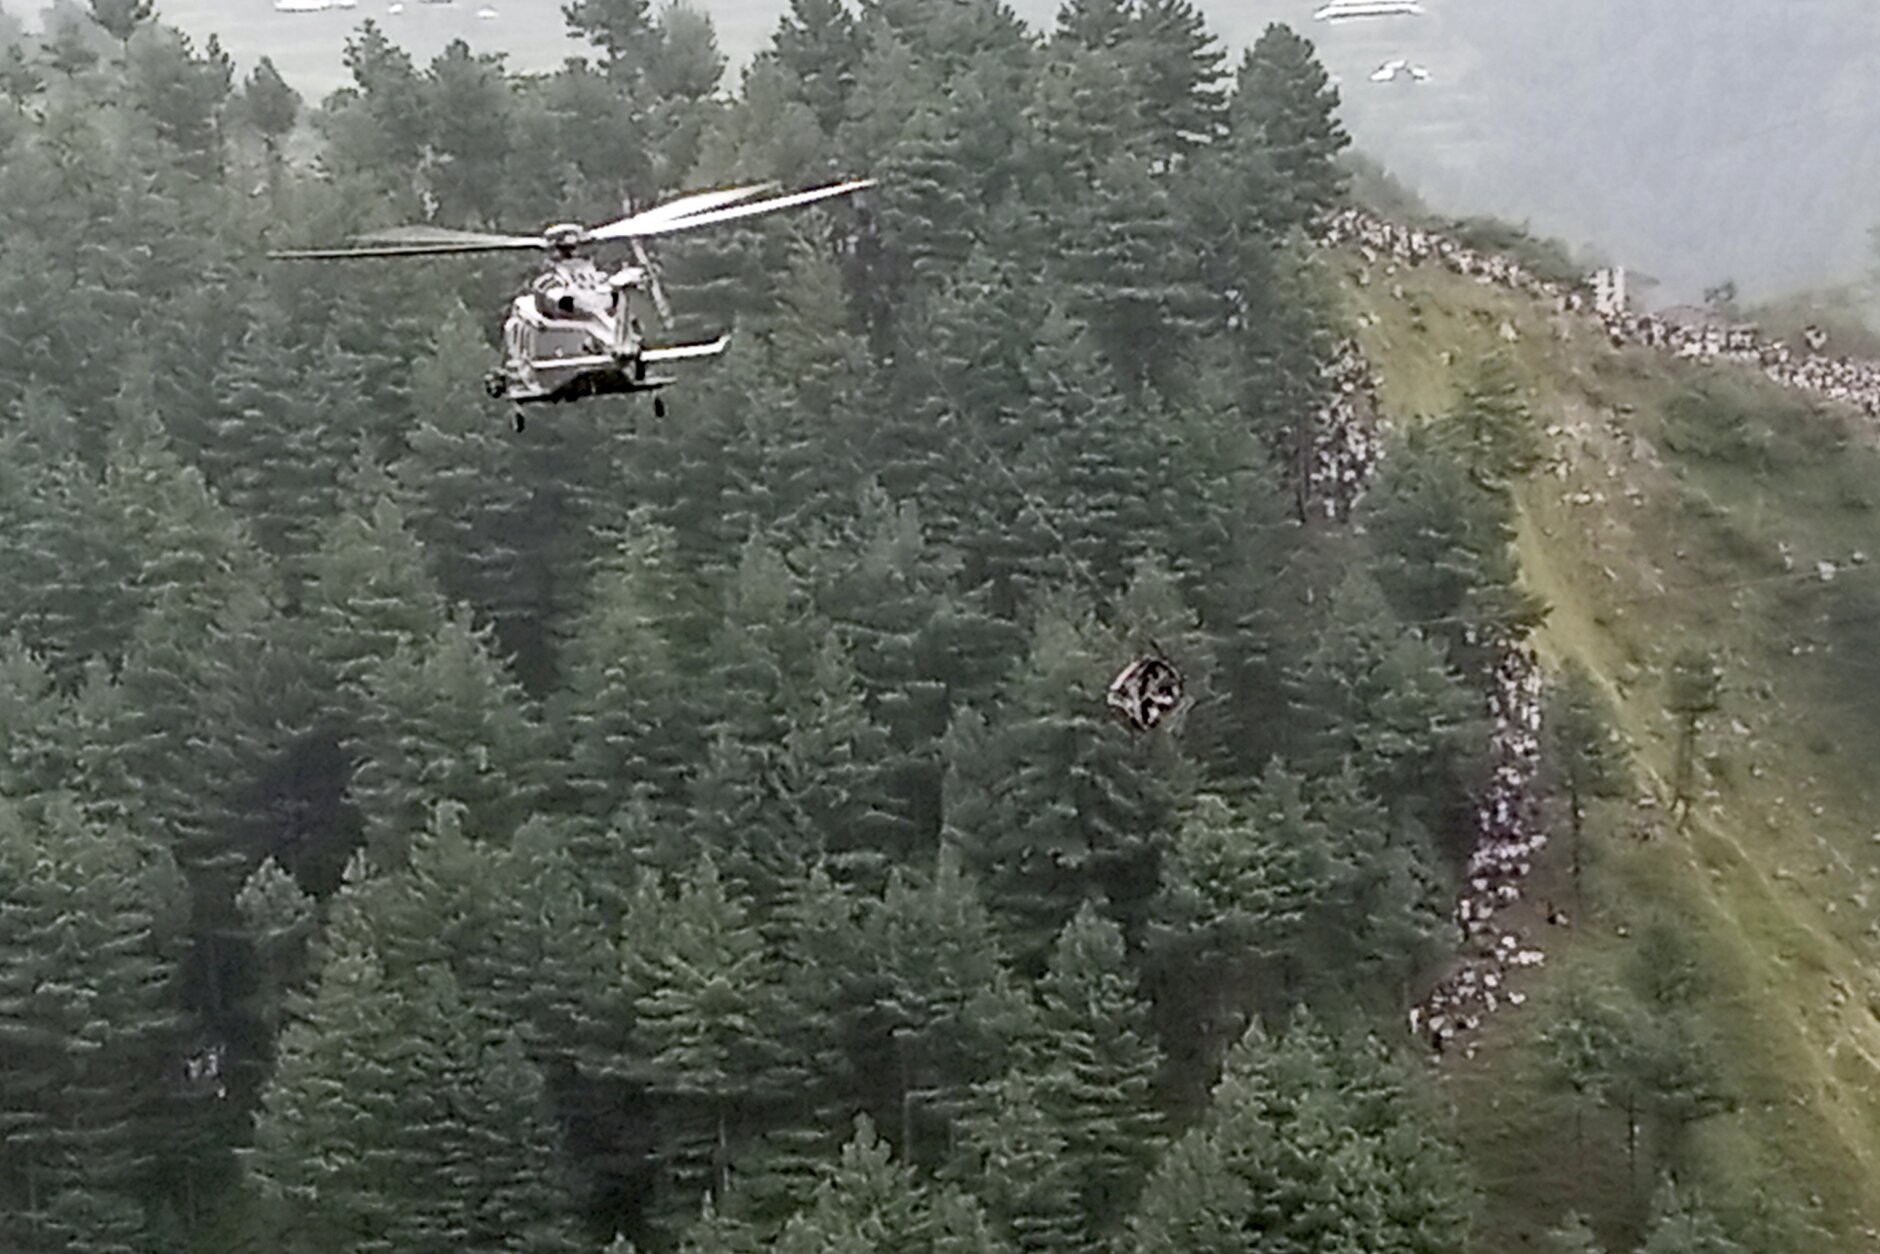 Pakistan cable car: all 8 people rescued using makeshift chairlift